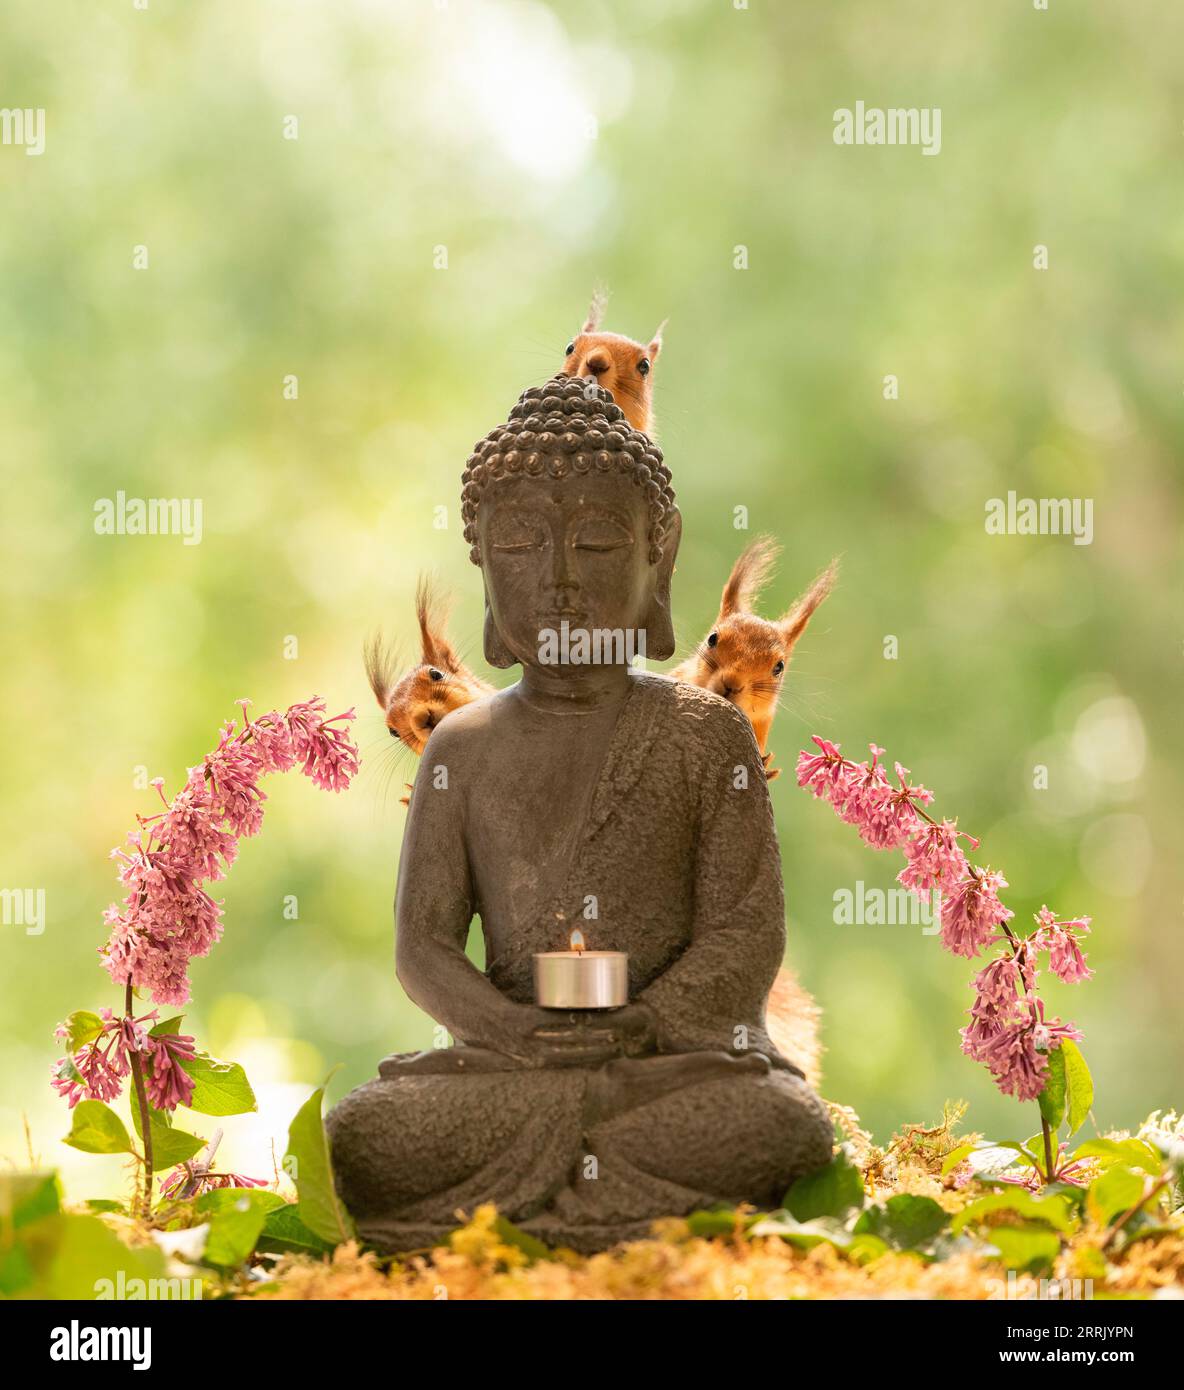 Red squirrels with a budha statue Stock Photo